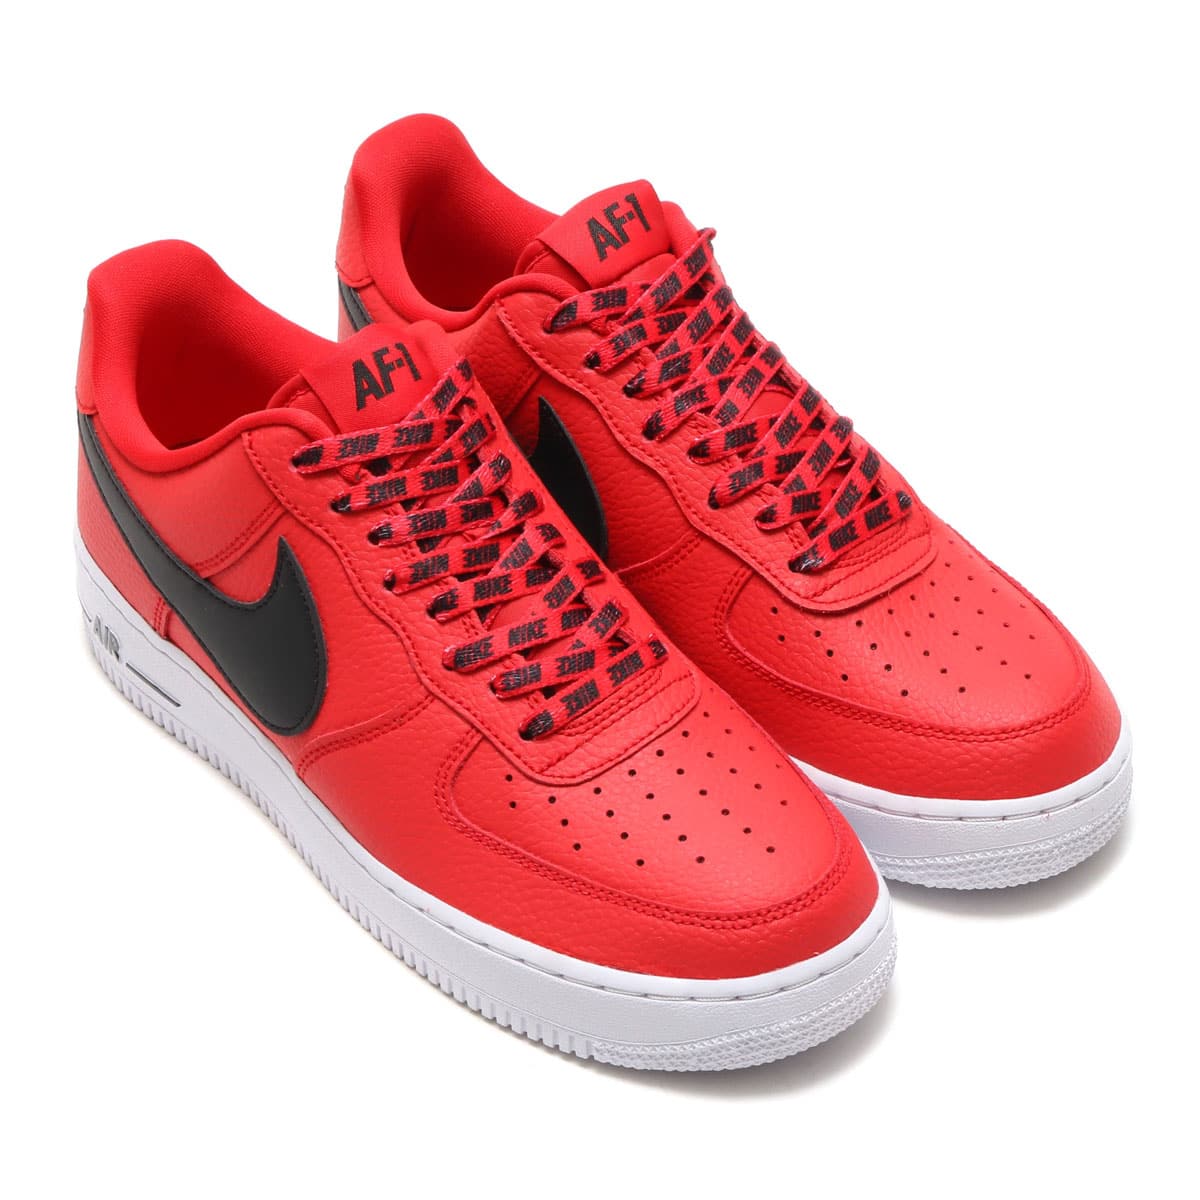 NIKE AIR FORCE 1 '07 LV8 UNIVERSITY RED 